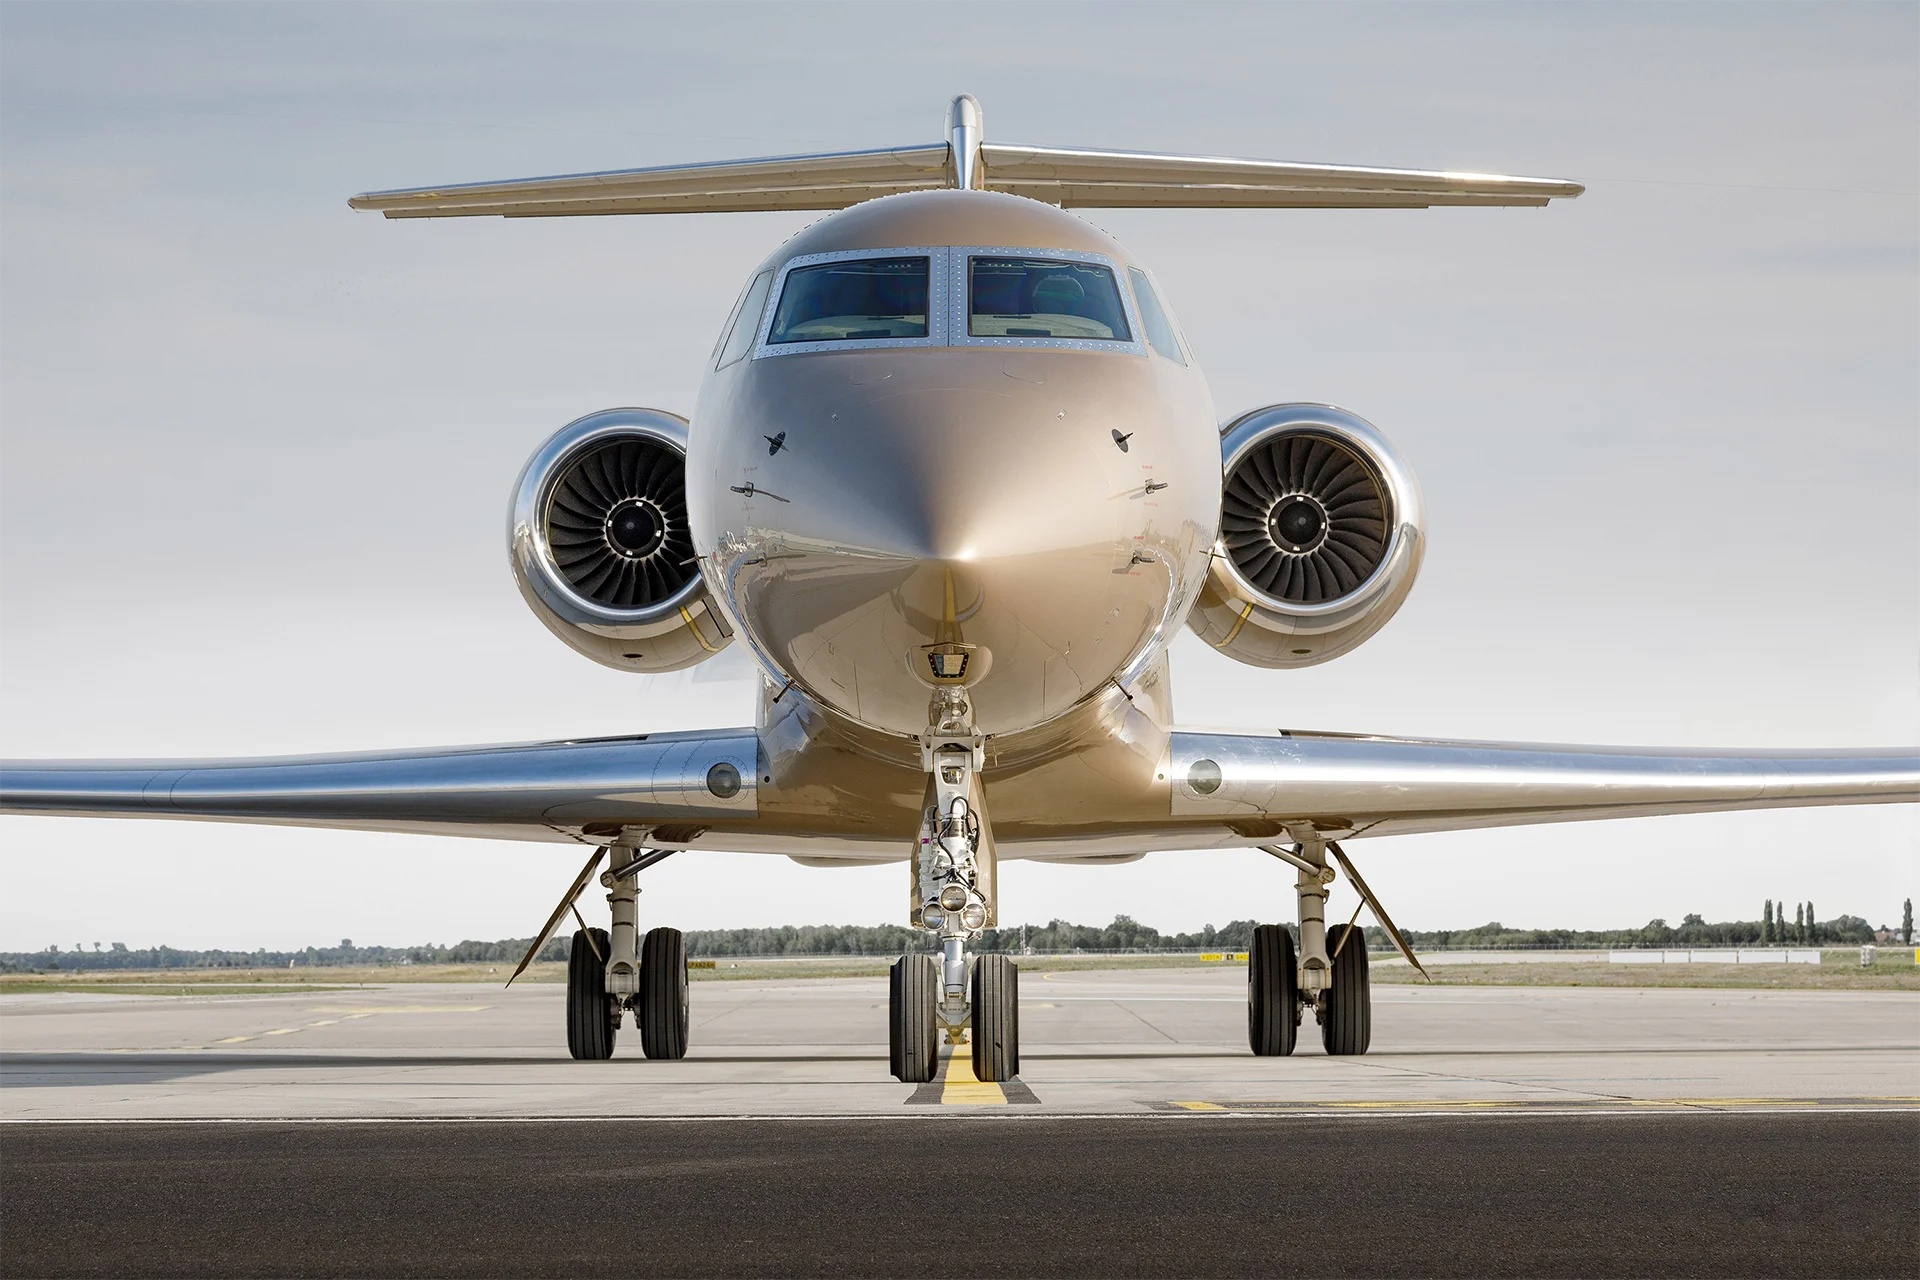 A Gulfstream G550 which we offer for our private jet charter and is part of Avcon Jet's Charter Fleet.